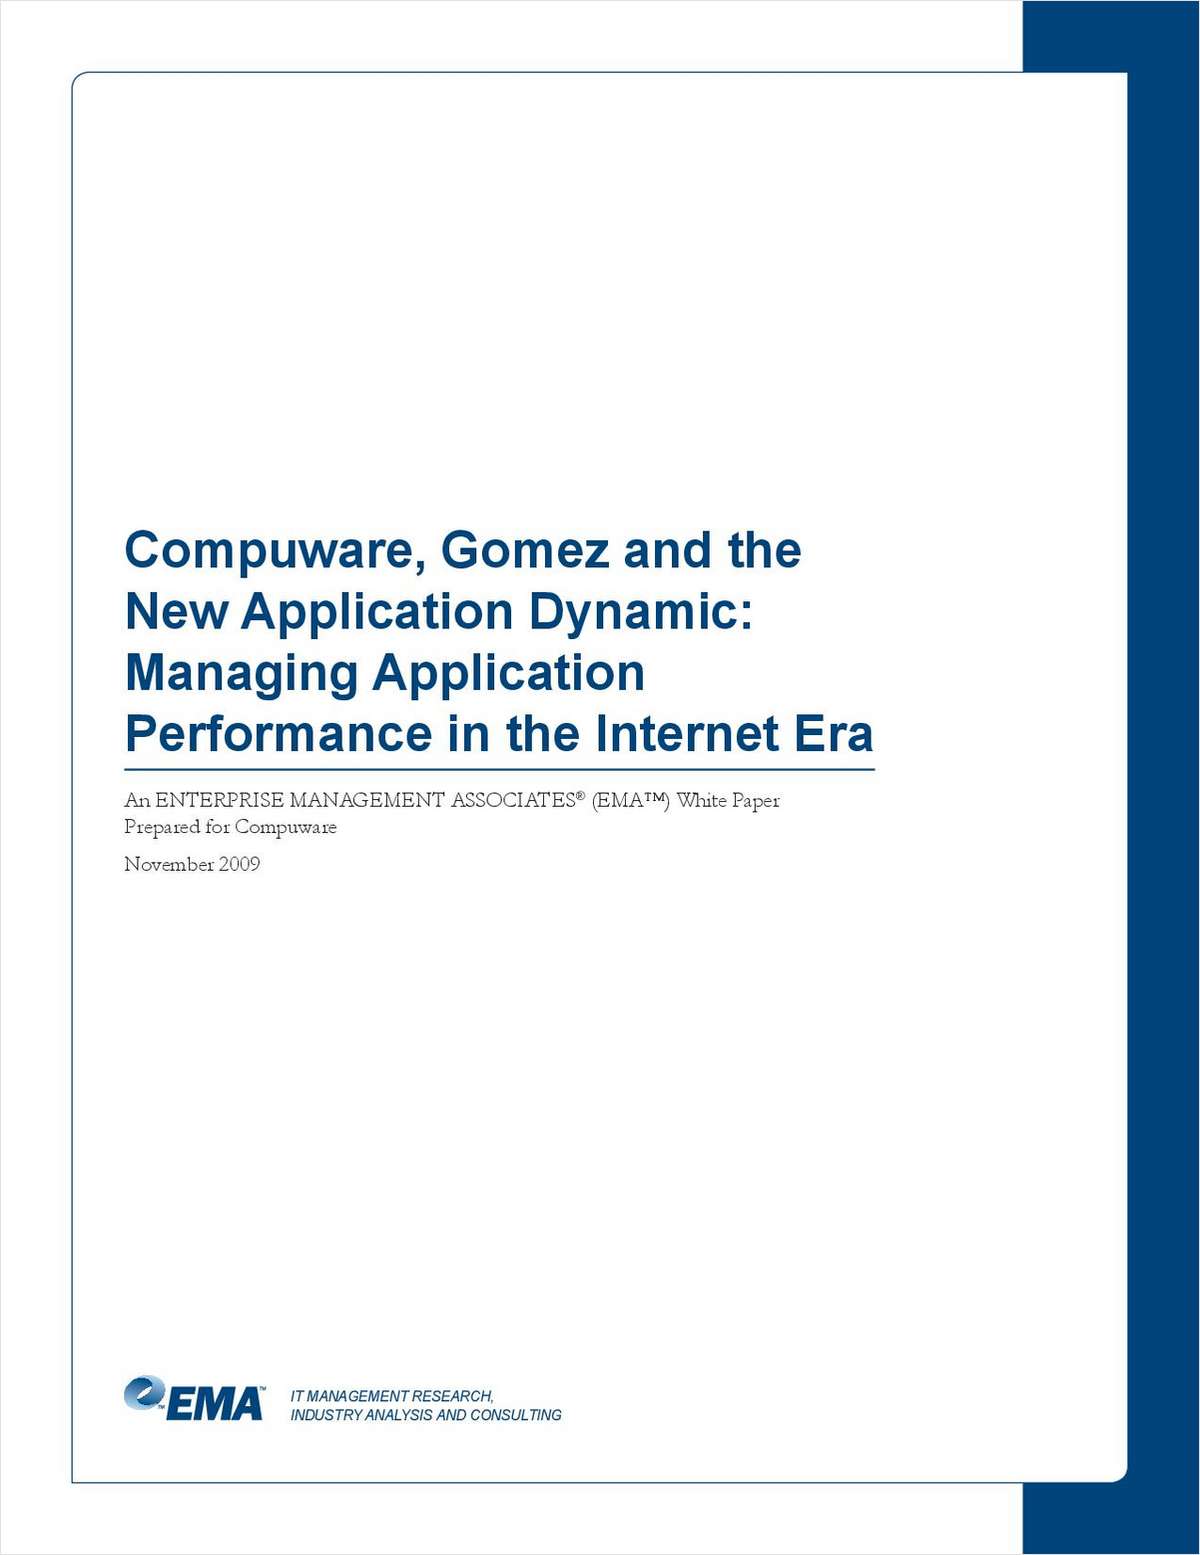 Managing Application Performance in the Internet Era